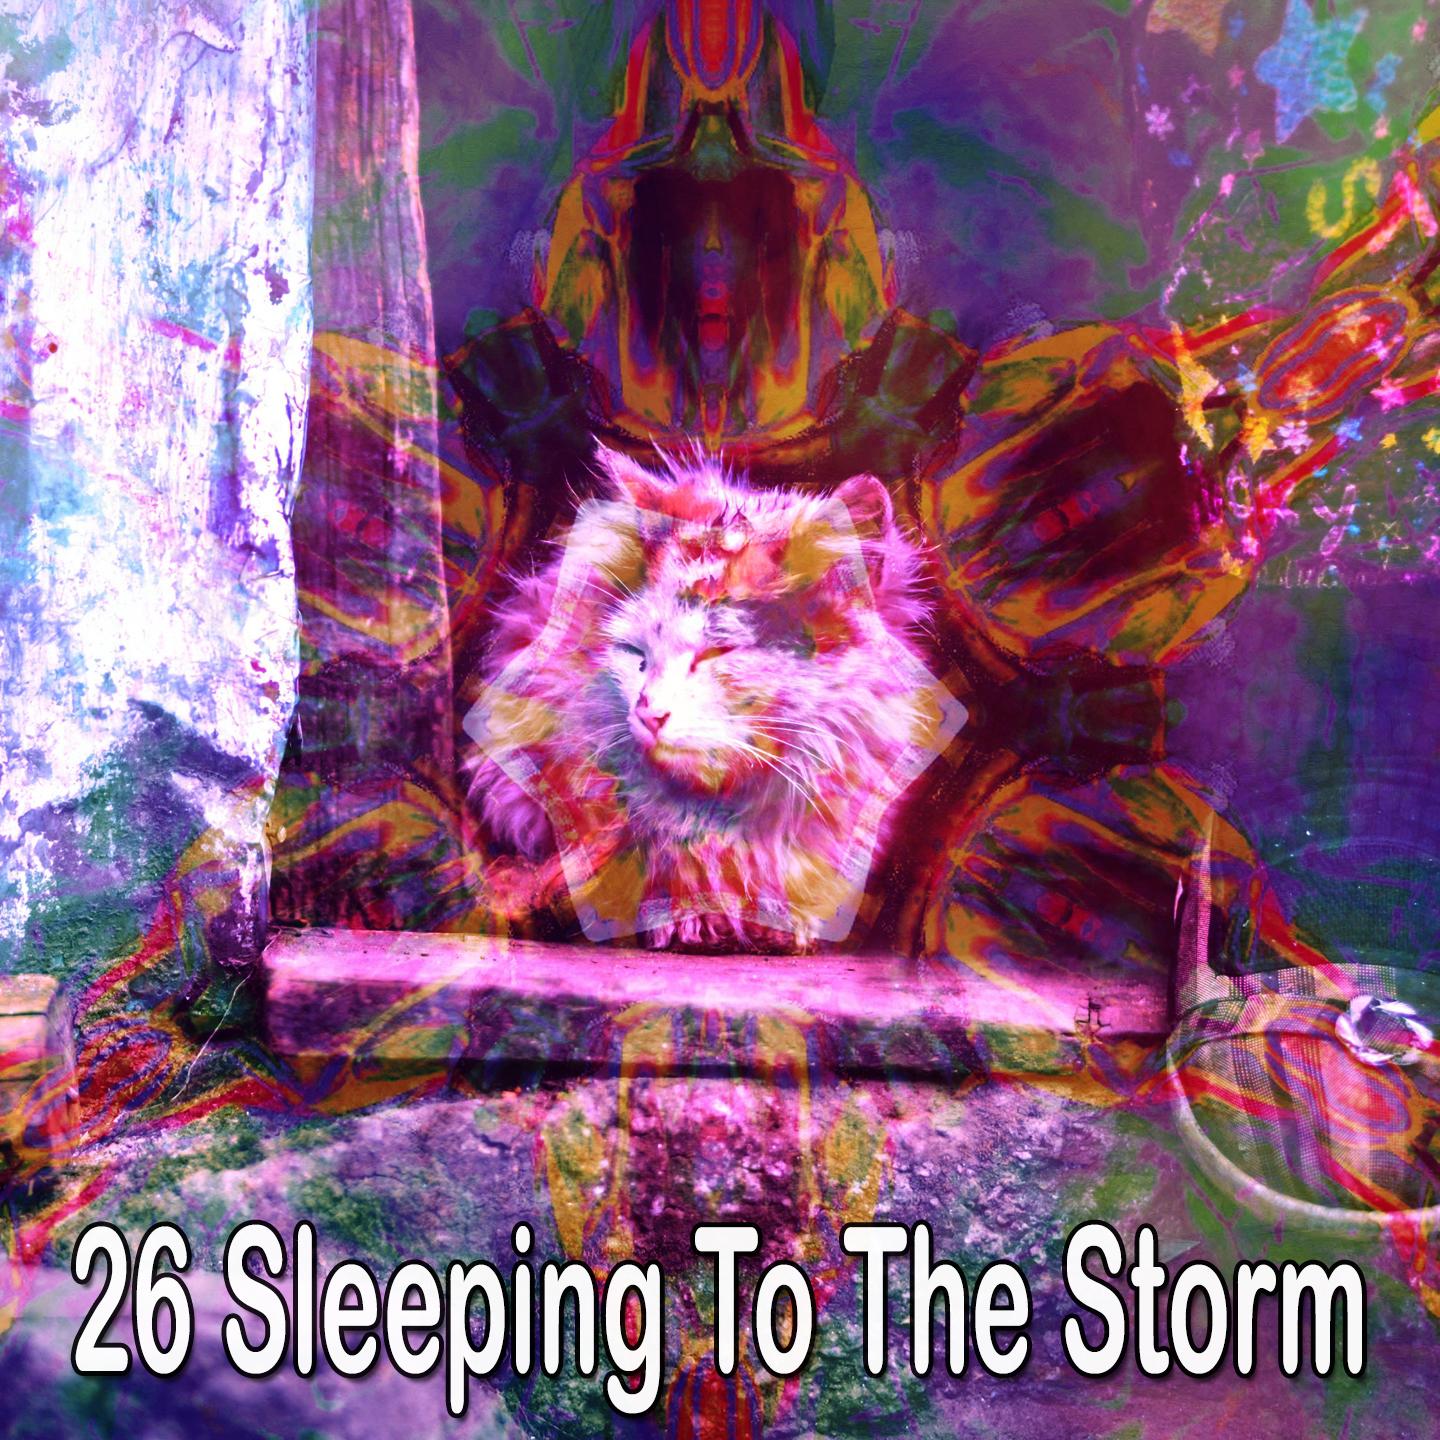 26 Sleeping to the Storm